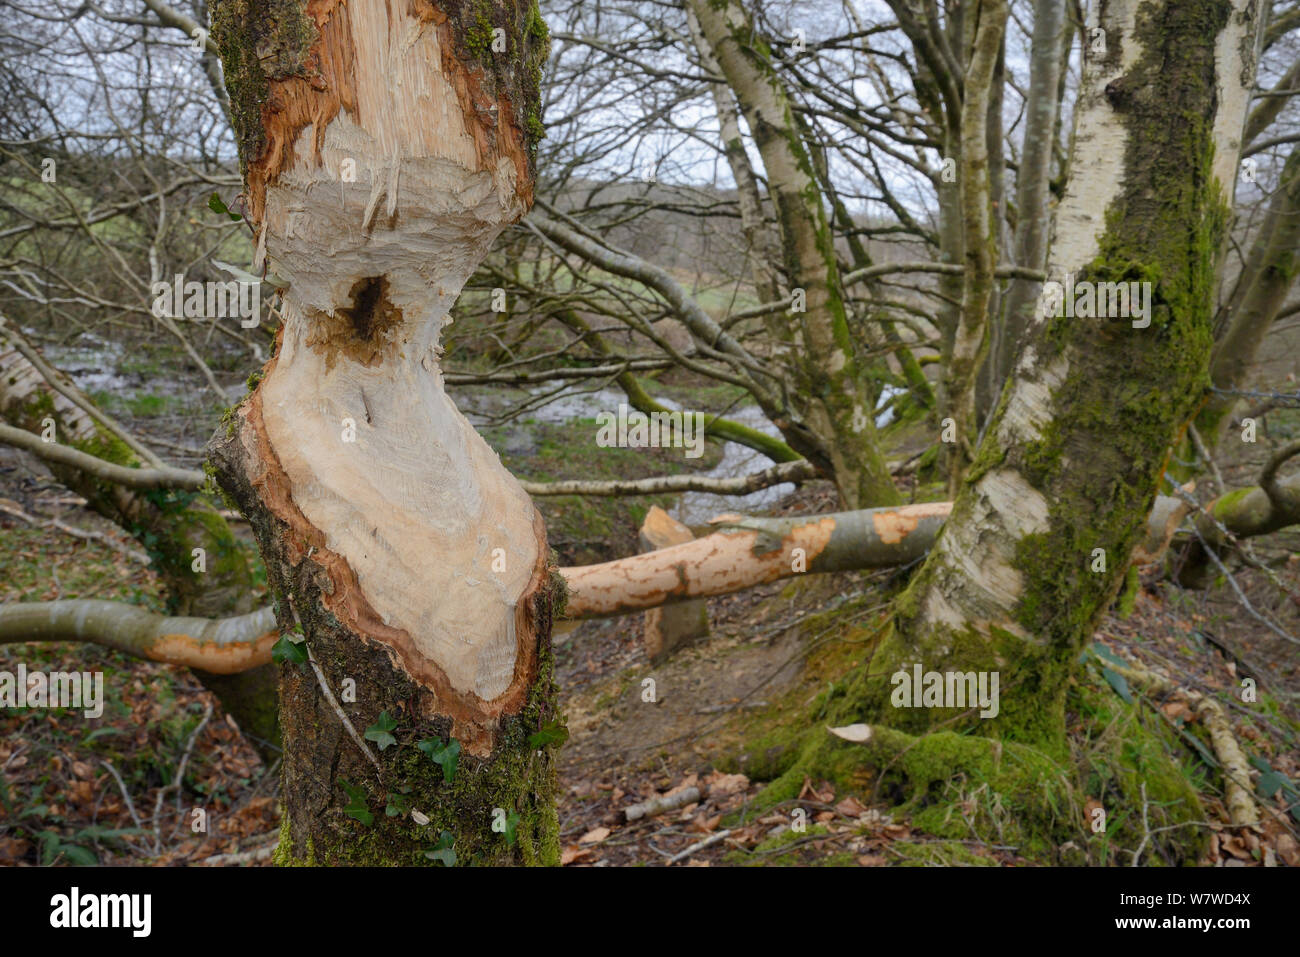 Alder tree (Alnus glutinosa) with trunk heavily gnawed by Eurasian beavers (Castor fiber) with Downy birch trees (Betula pubescens) felled in the background, within a large wet woodland stream enclosure, Devon, UK, March. Stock Photo